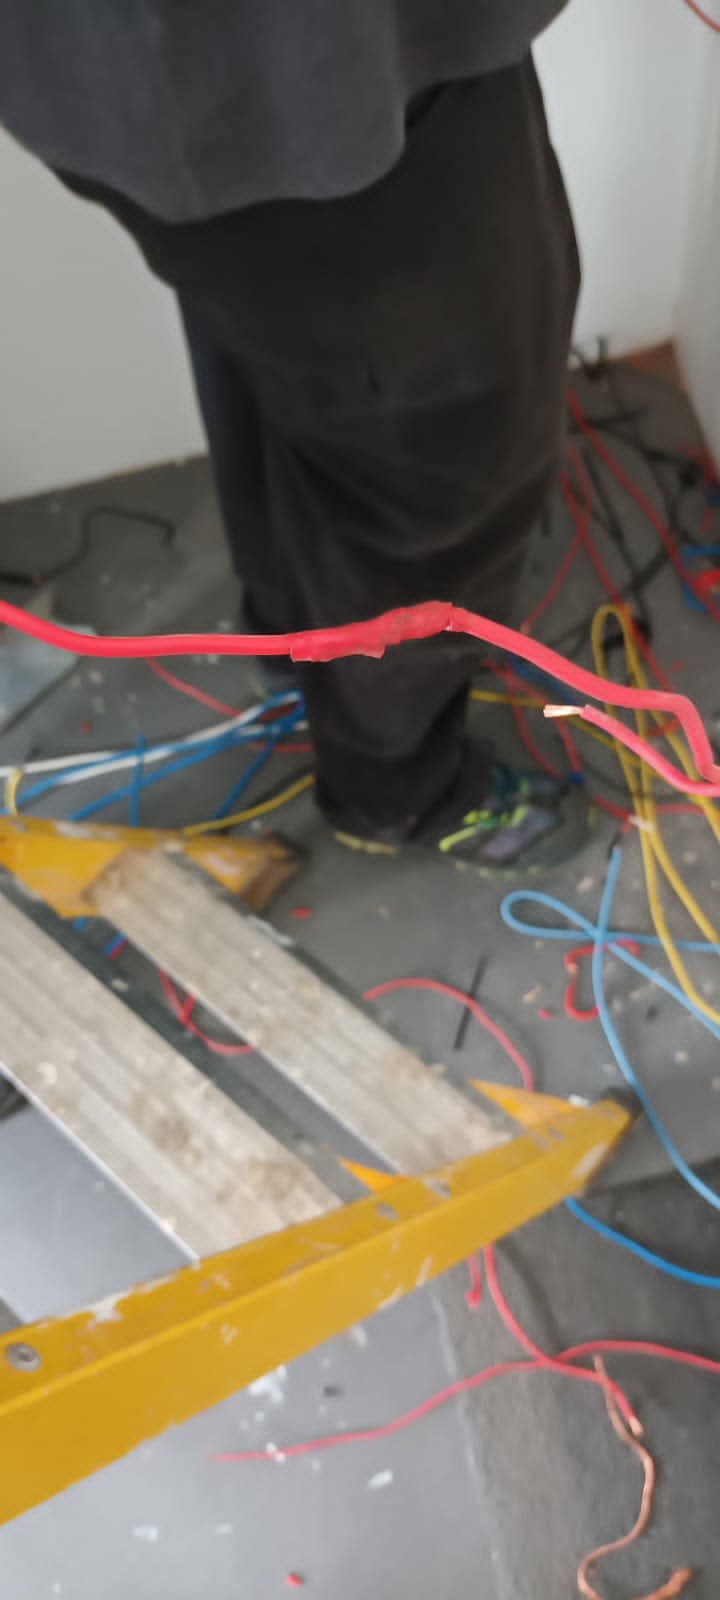 Wires of different thicknesses connected together